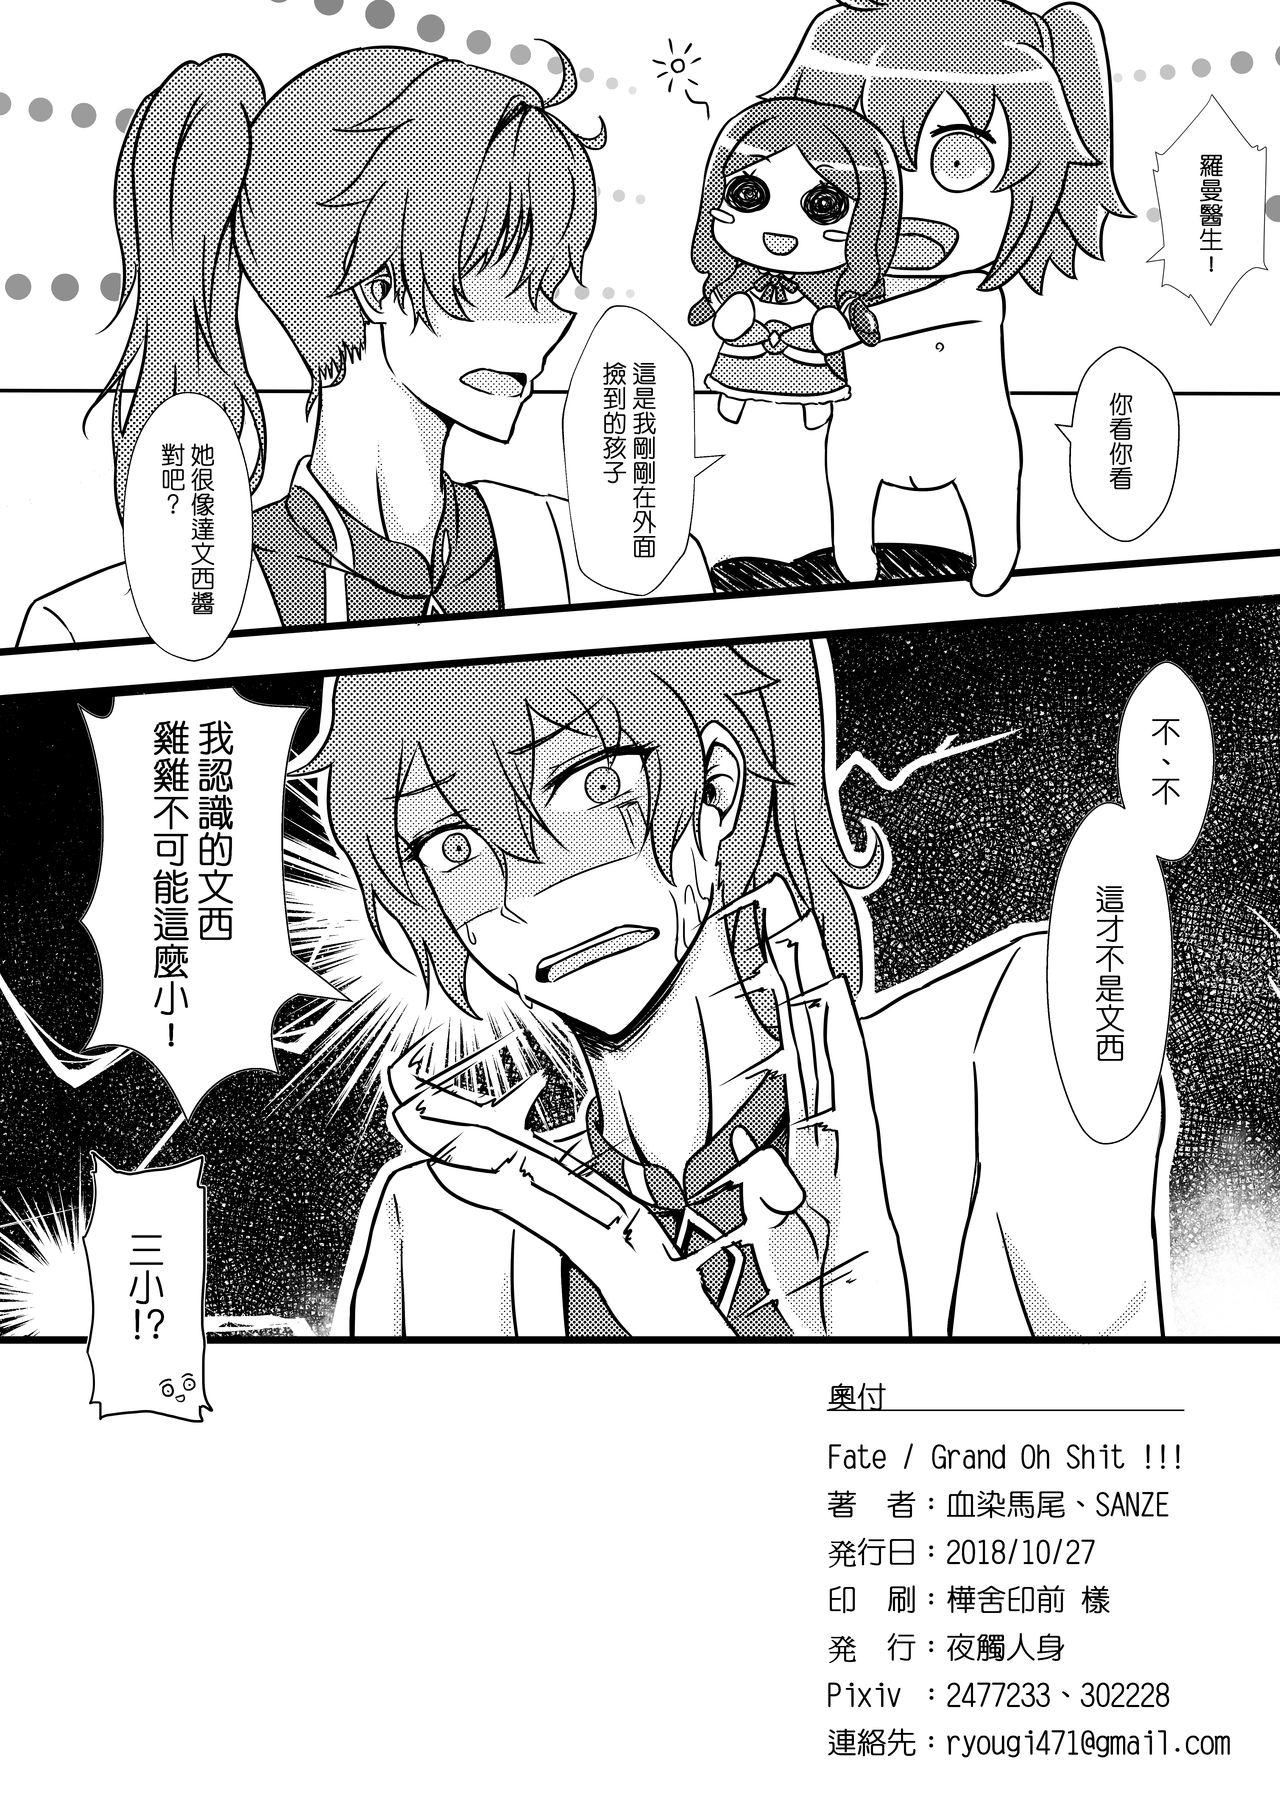 Eating Fate Grand Oh・Shit!V - Fate grand order Penetration - Page 10